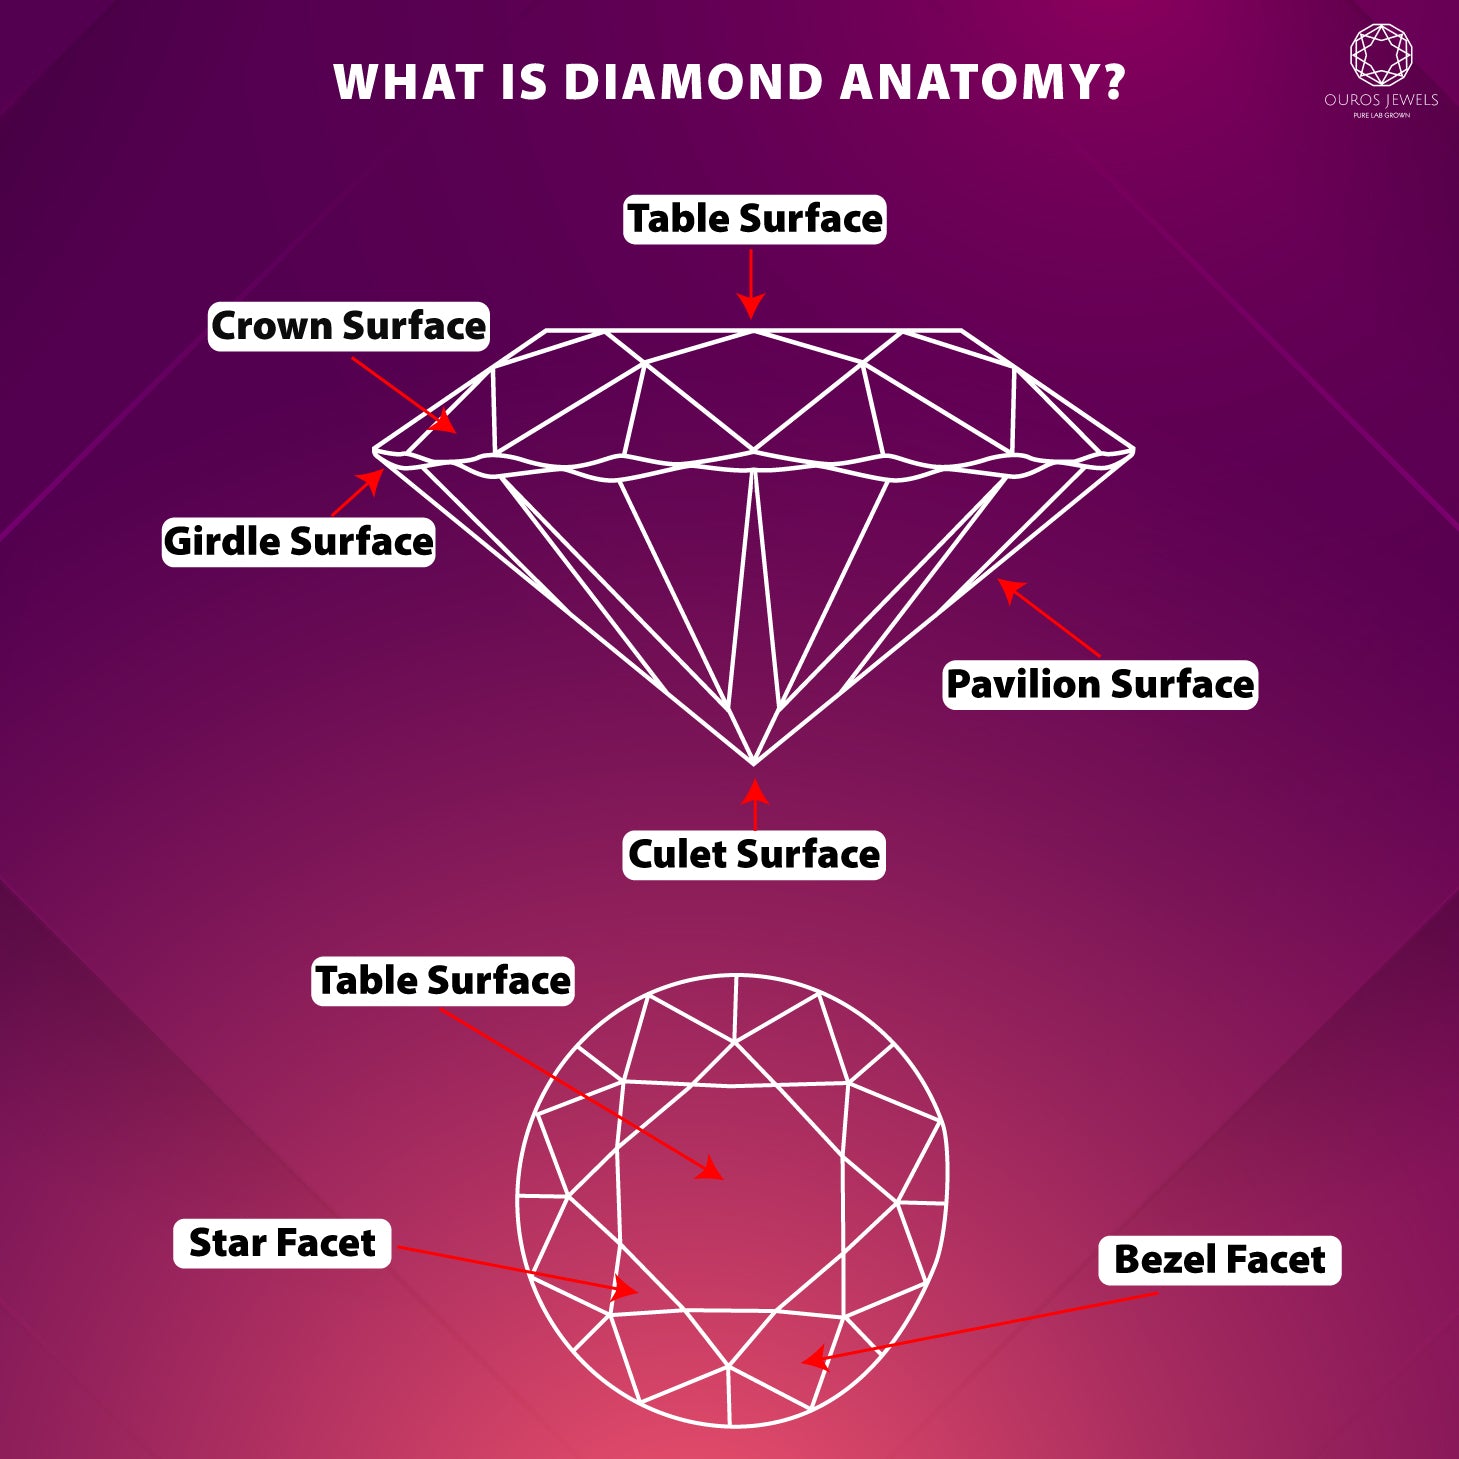 Diamond Anatomy Definition and Guide